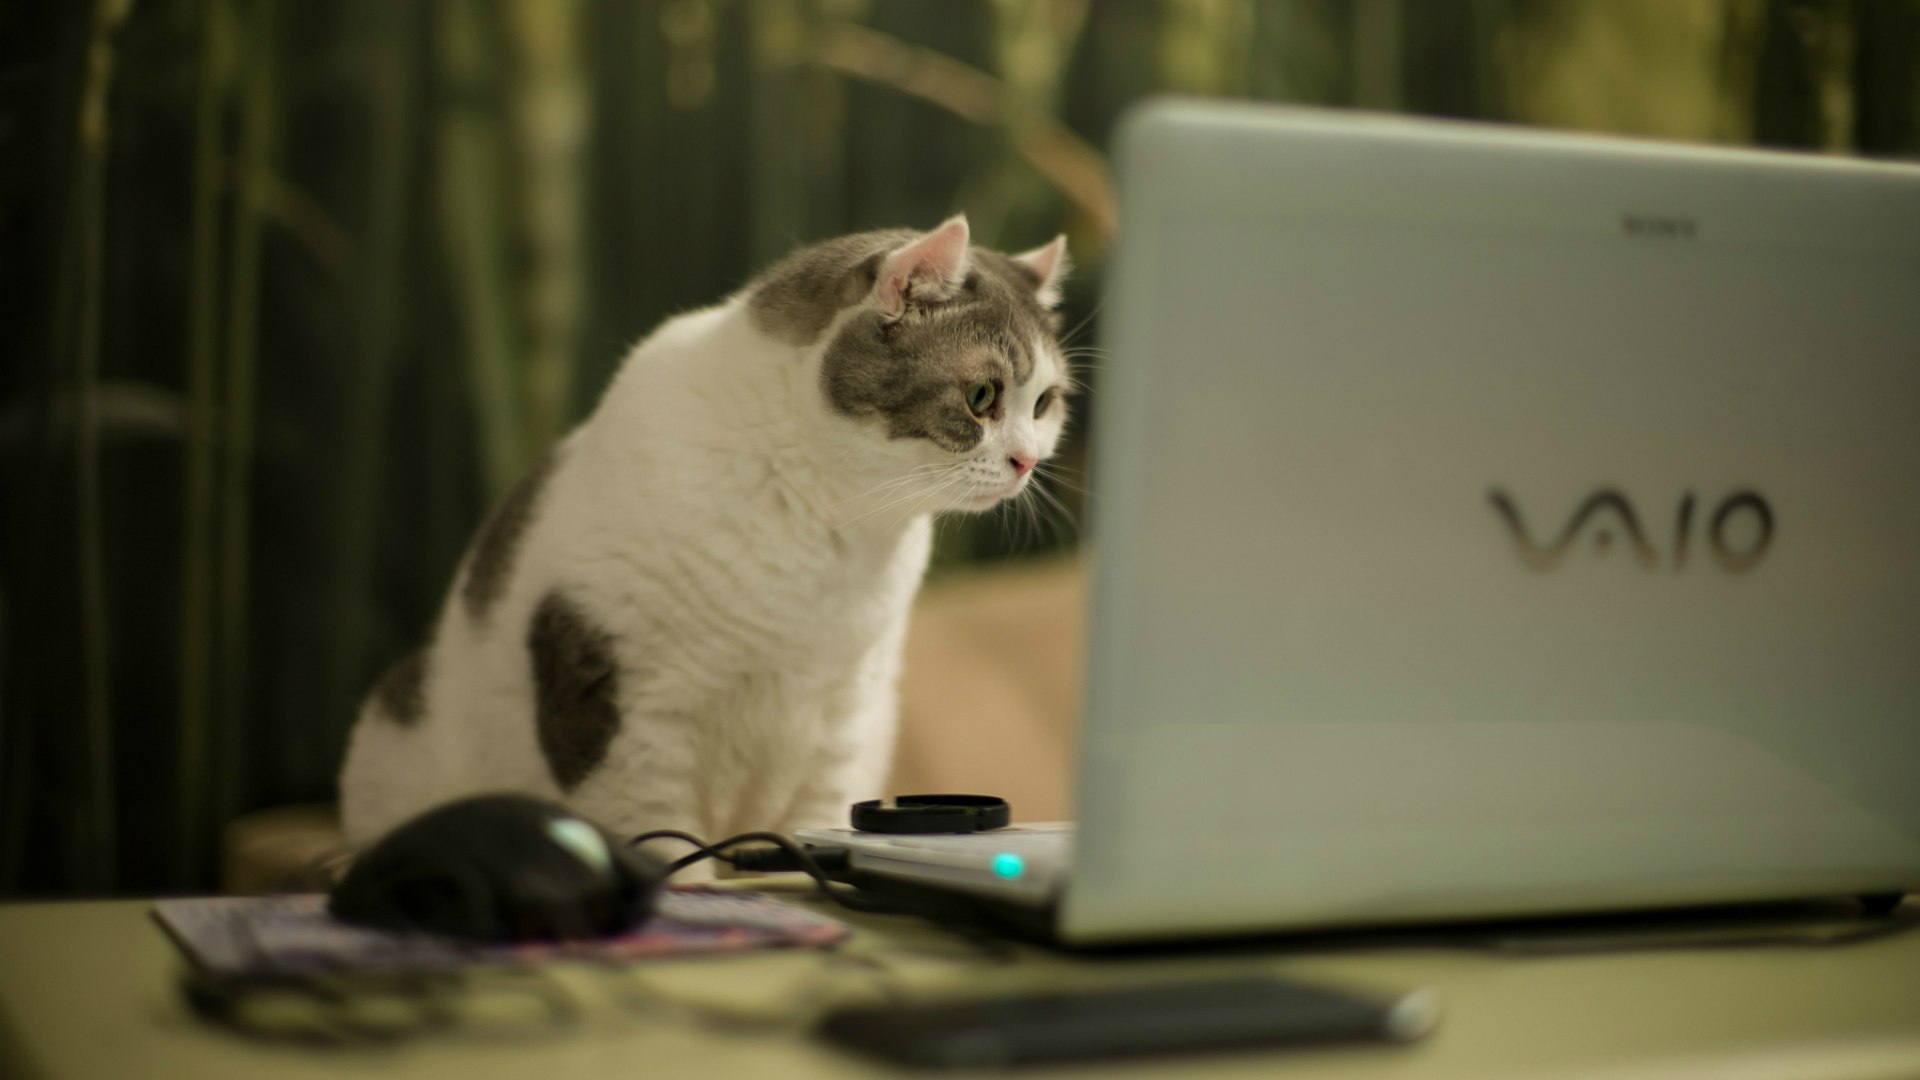 Cat looking at a laptop screen wallpapers and images - wallpapers, pictures, photos